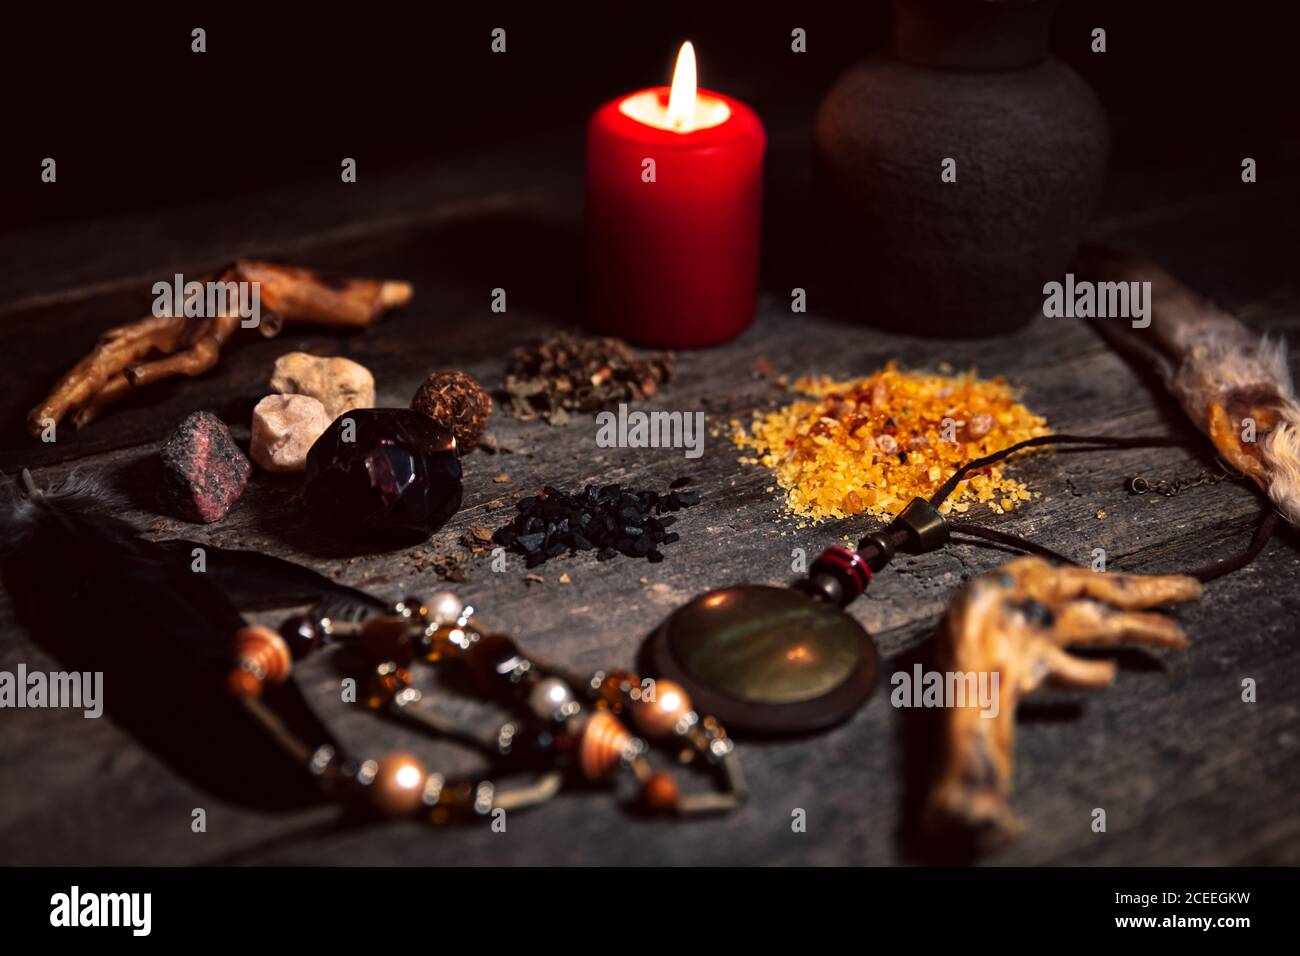 Voodoo or vodun ingredients for an dark ritual, witchcraft and african religion, talisman, incense, crow´s feet and gems Stock Photo